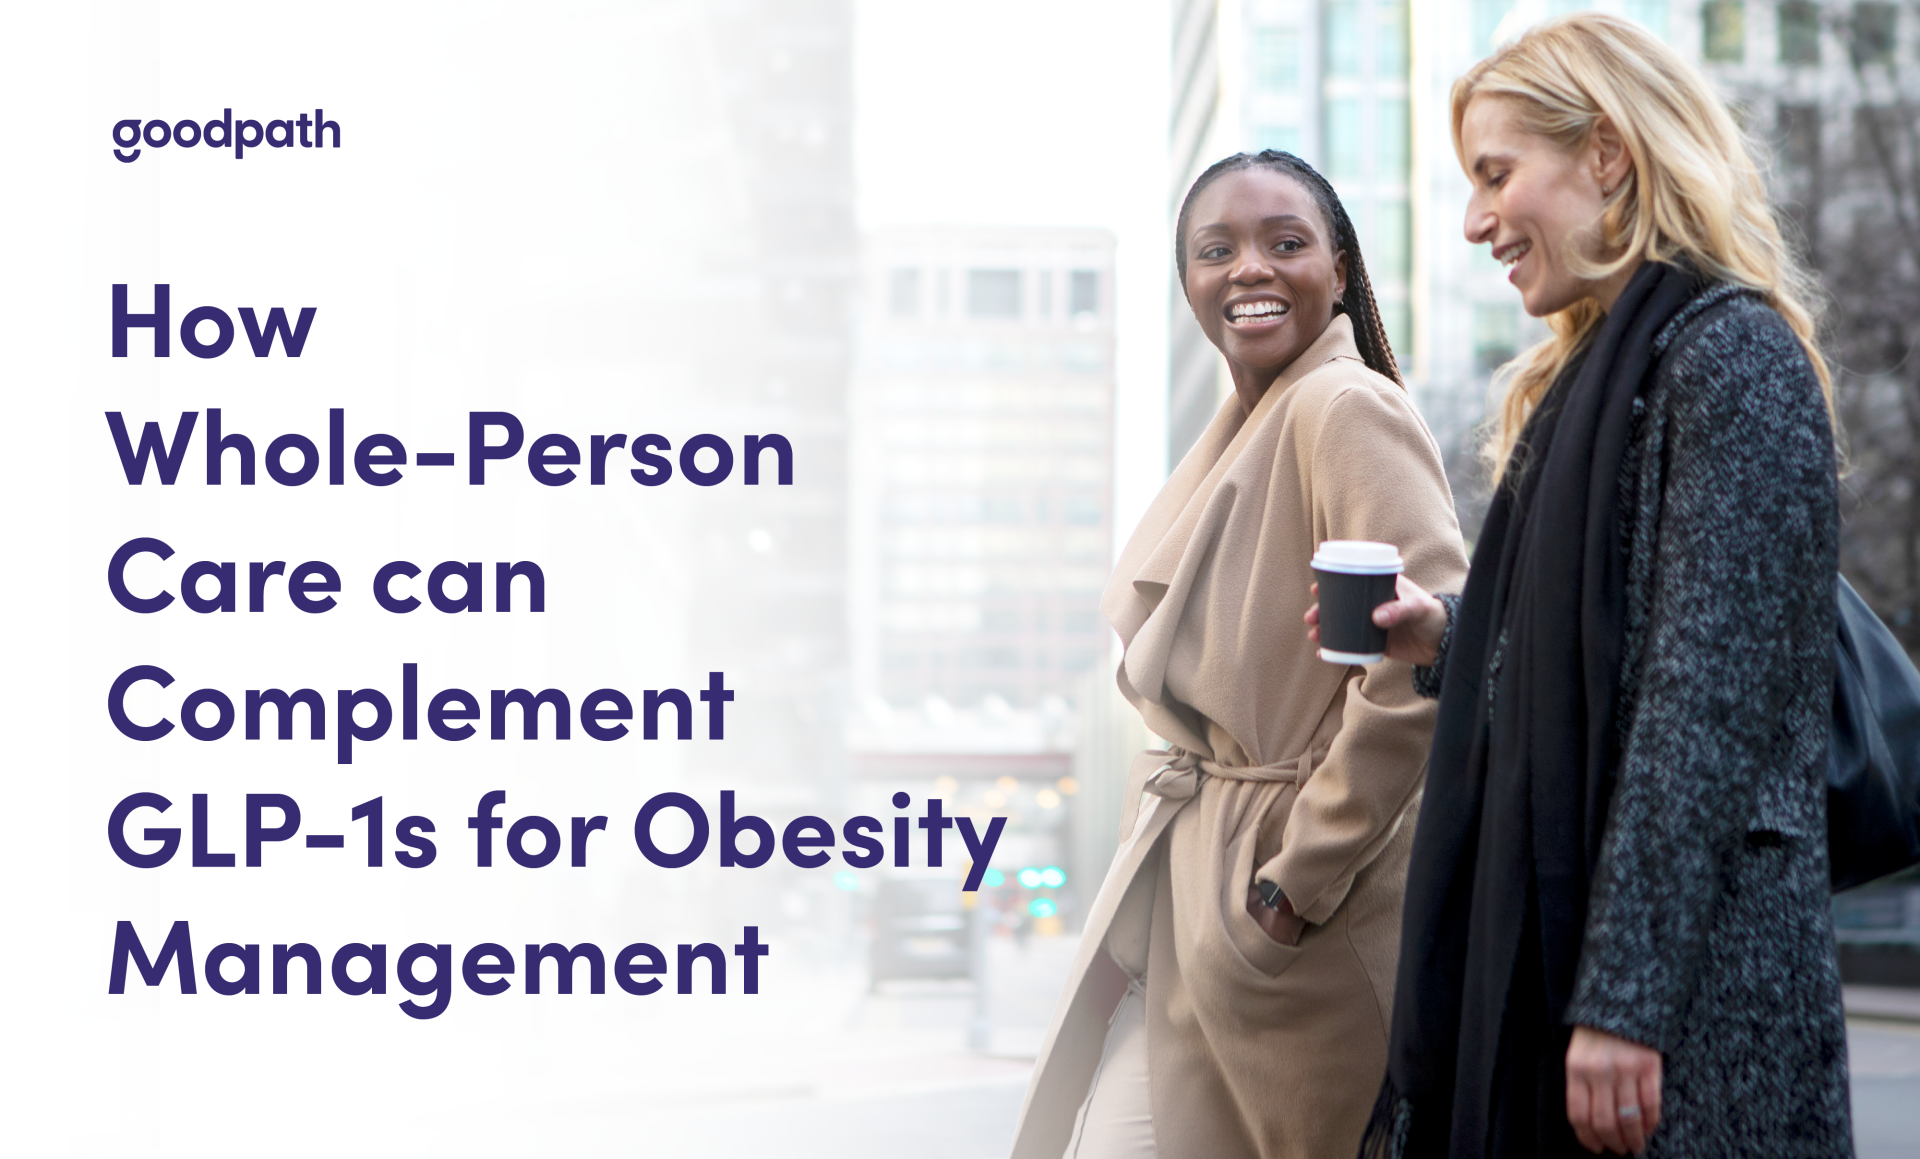 How Whole-Person Care Can Complement GLP-1s for Obesity